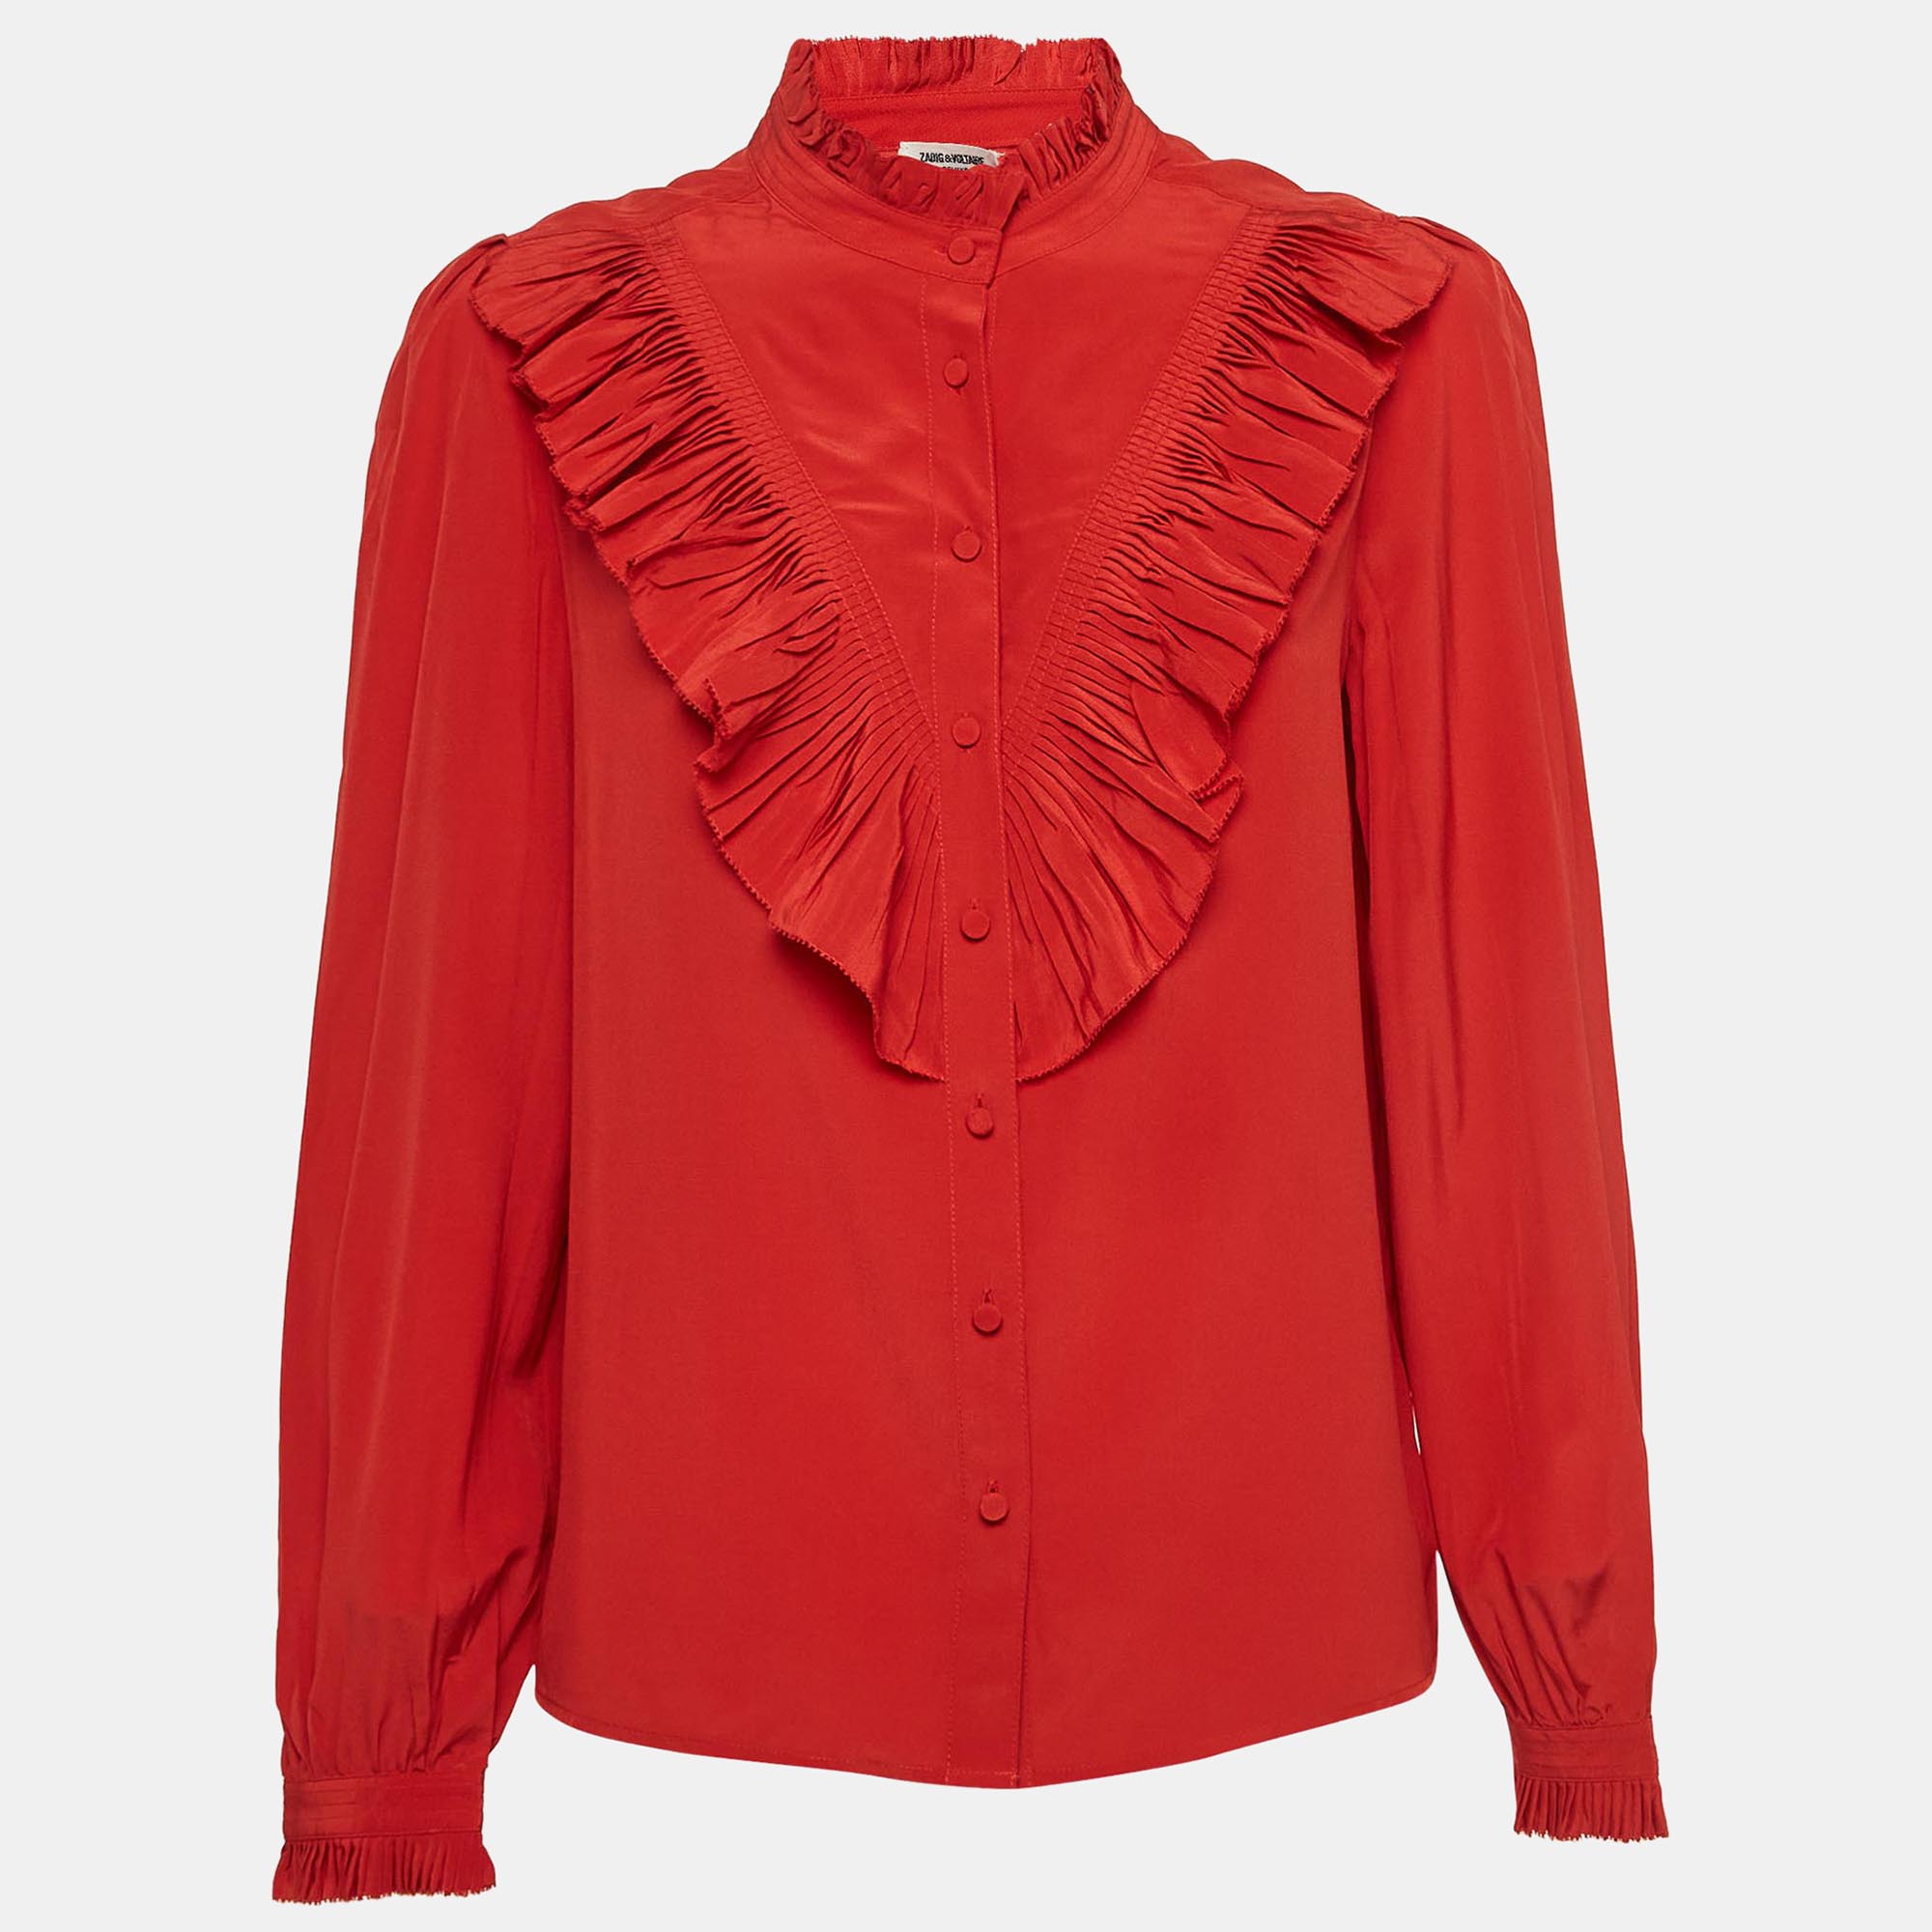 Zadig & voltaire red silk ruffled taccora blouse xs